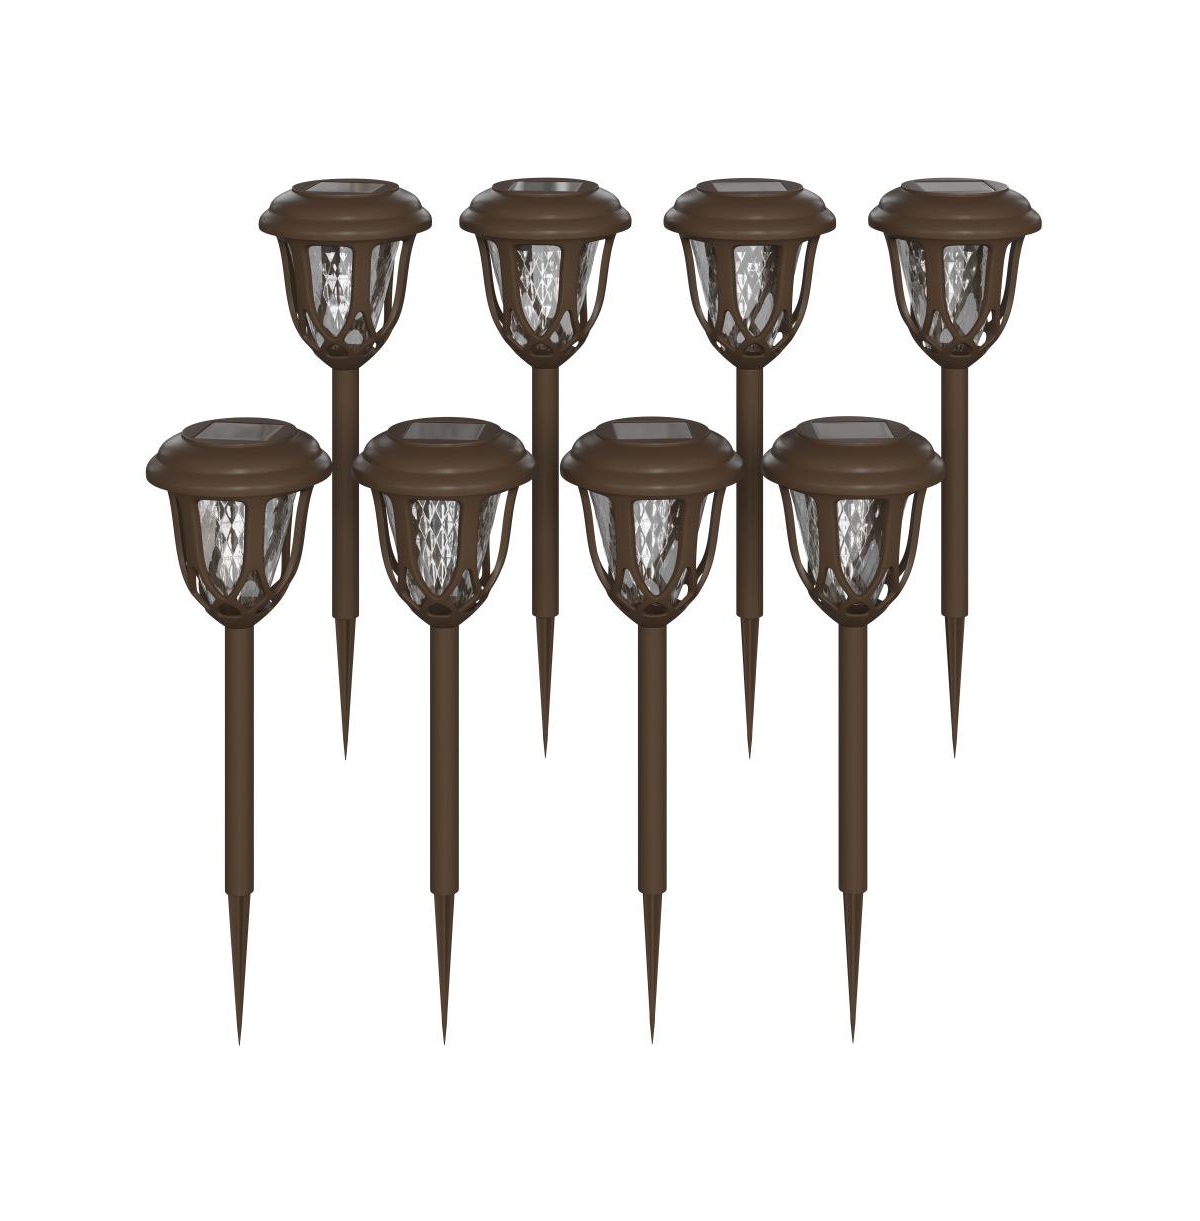 All-Weather Tulip Design Led Solar Lights, Outdoor Solar Powered Lights For Pathway, Garden, & Yard - Set Of 8 - Brown